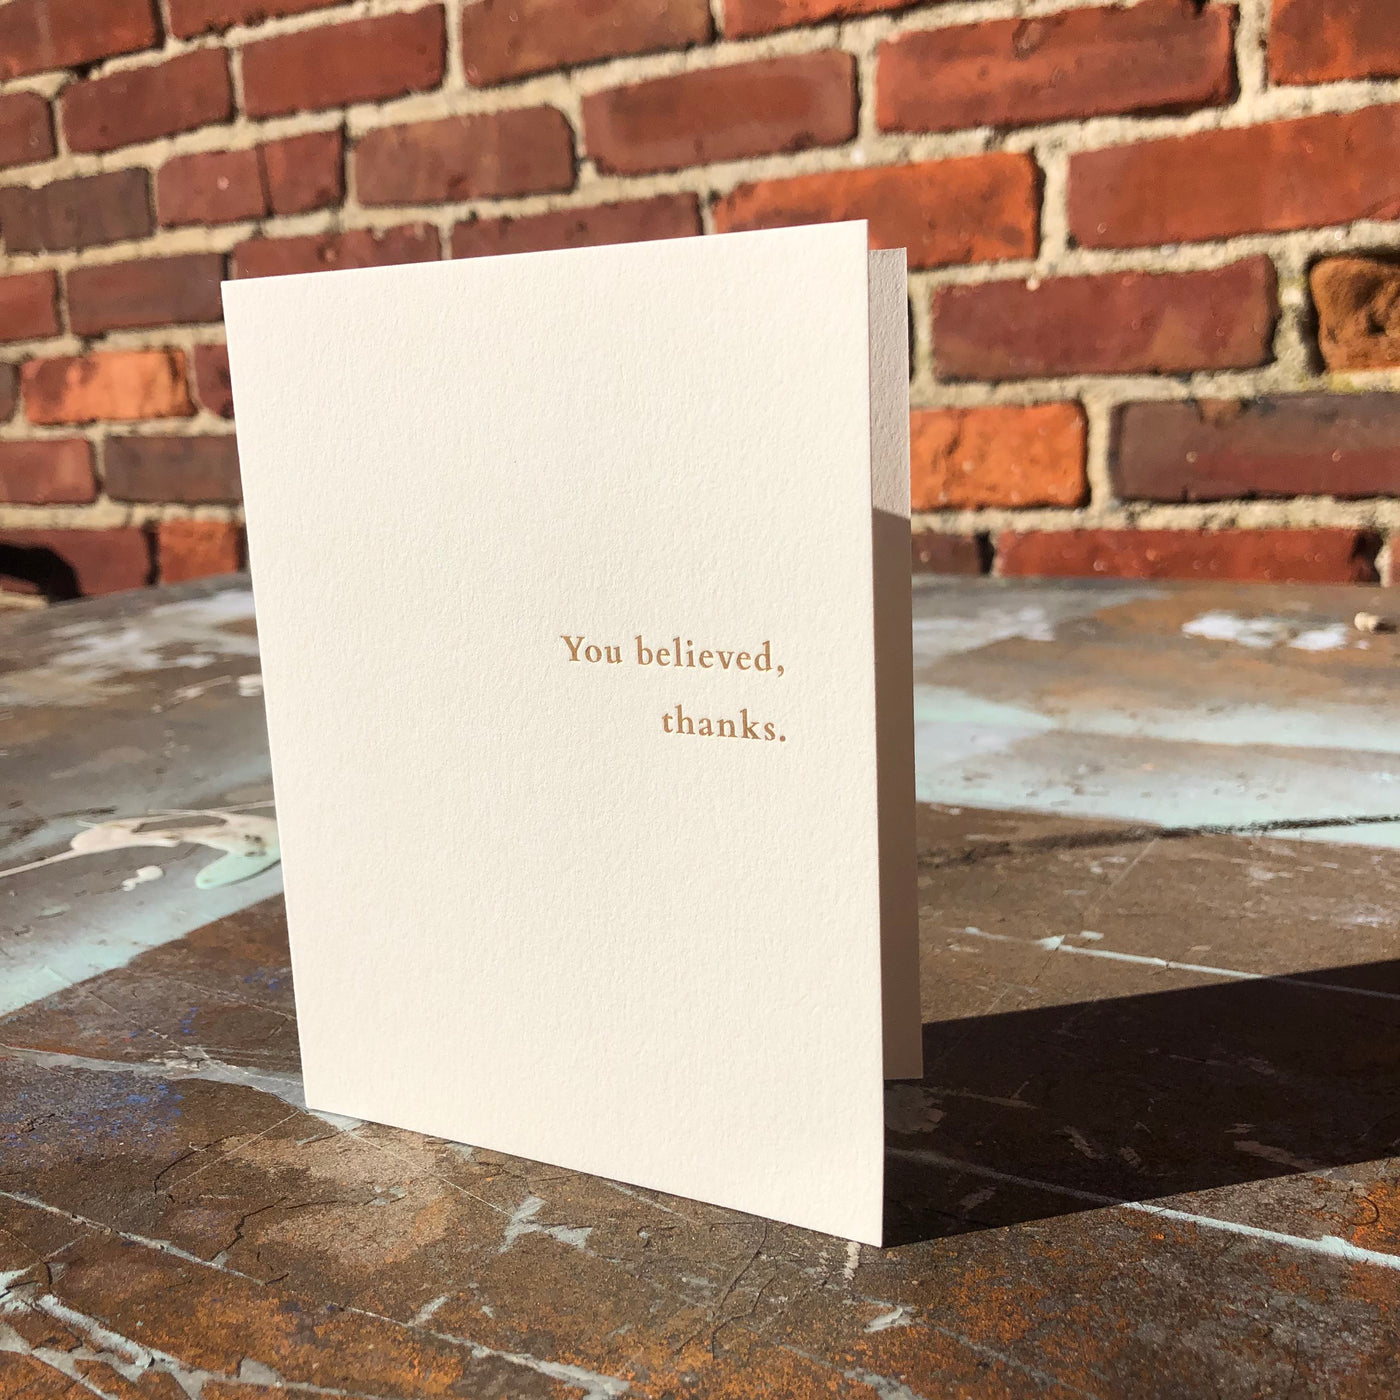 Greeting card on rusted table by beknown. You believed, thanks.